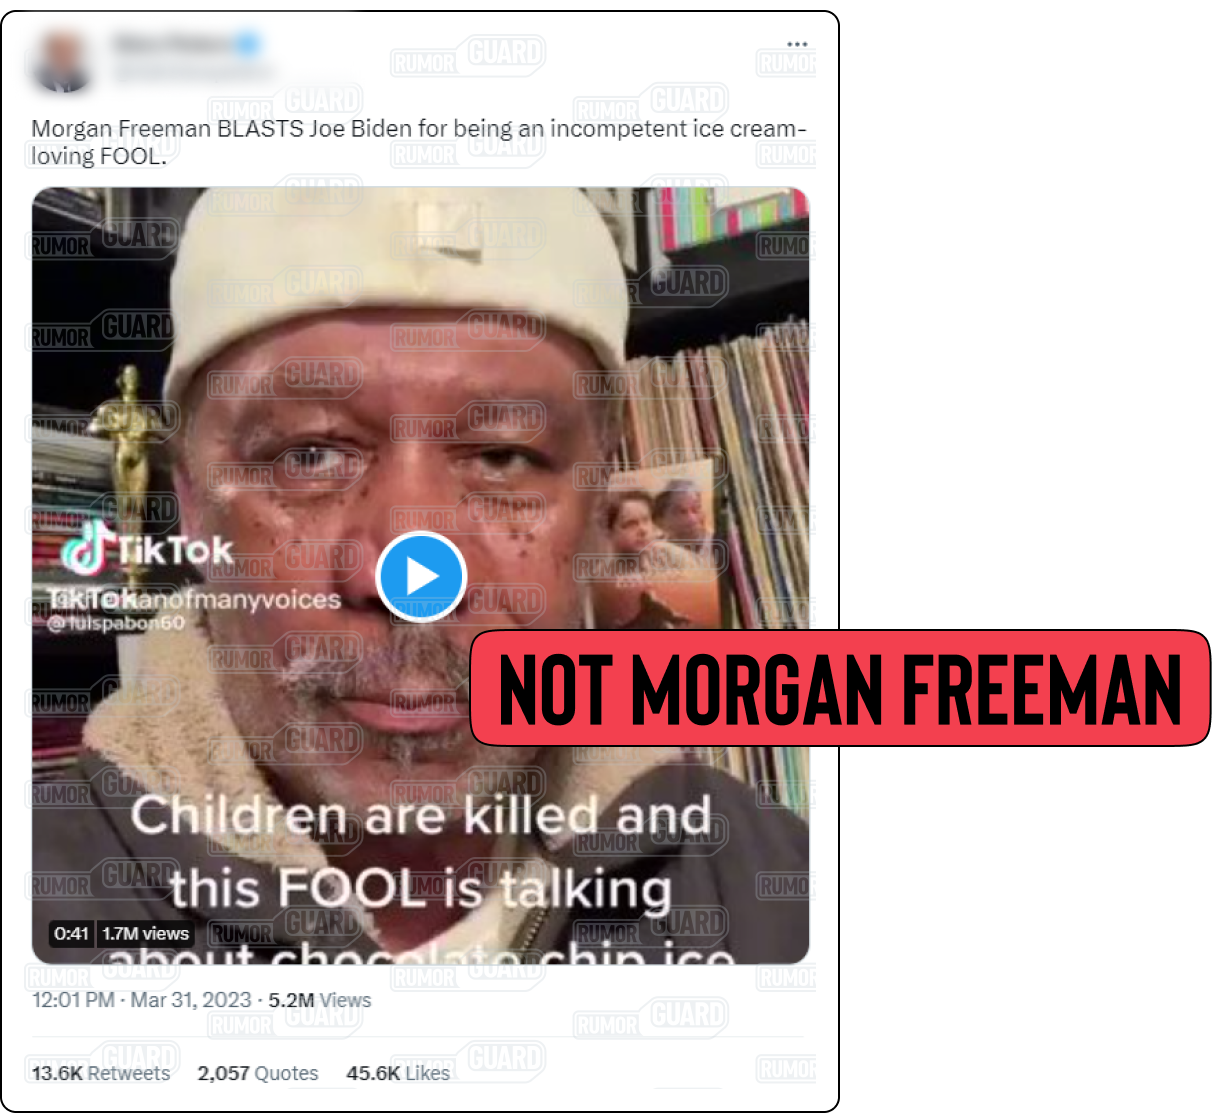 A tweet reads “Morgan Freeman BLASTS Joe Biden for being an incompetent ice cream-loving FOOL” and features a video supposedly showing the actor deriding the president. The News Literacy Project has added a label that says, “NOT MORGAN FREEMAN.”